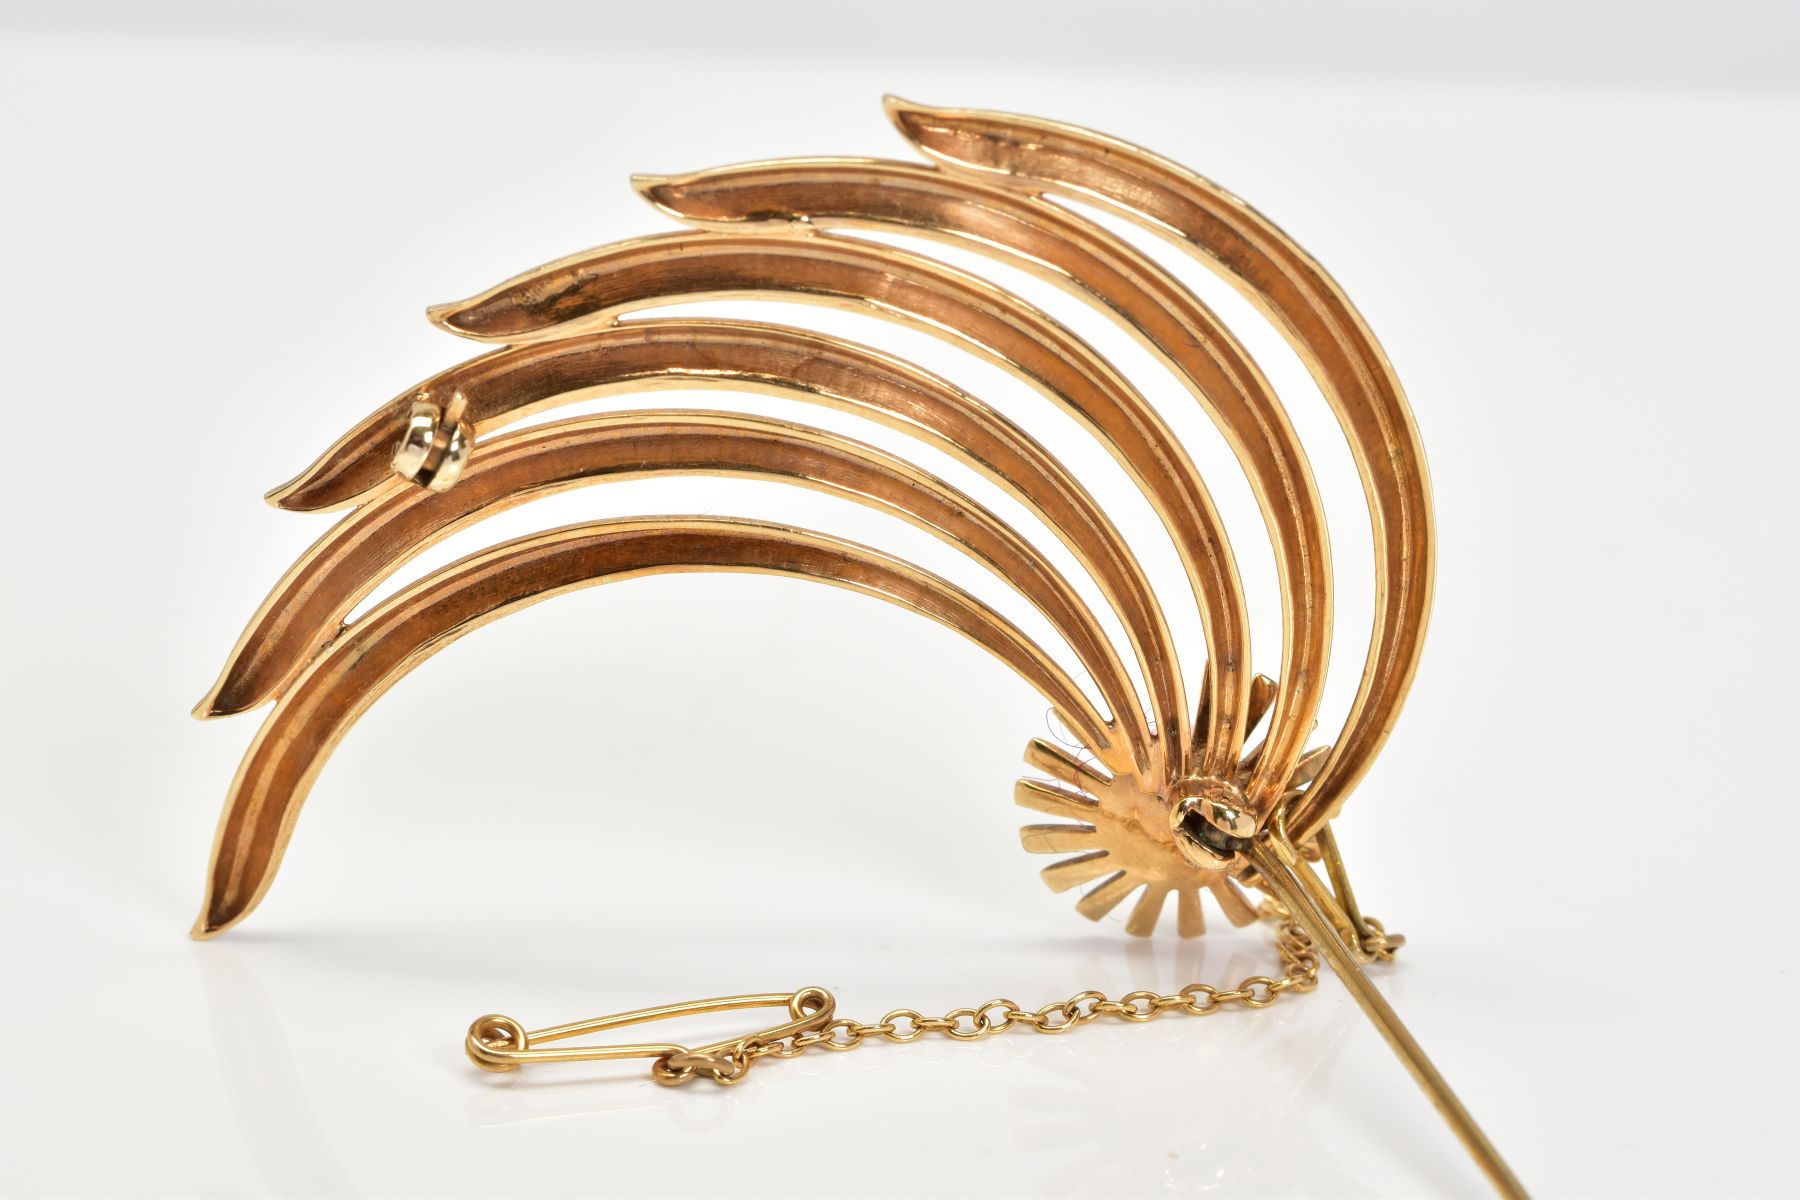 A 9CT GOLD PEARL BROOCH, designed with six curved openwork panels set with a single cultured pearl - Image 2 of 2